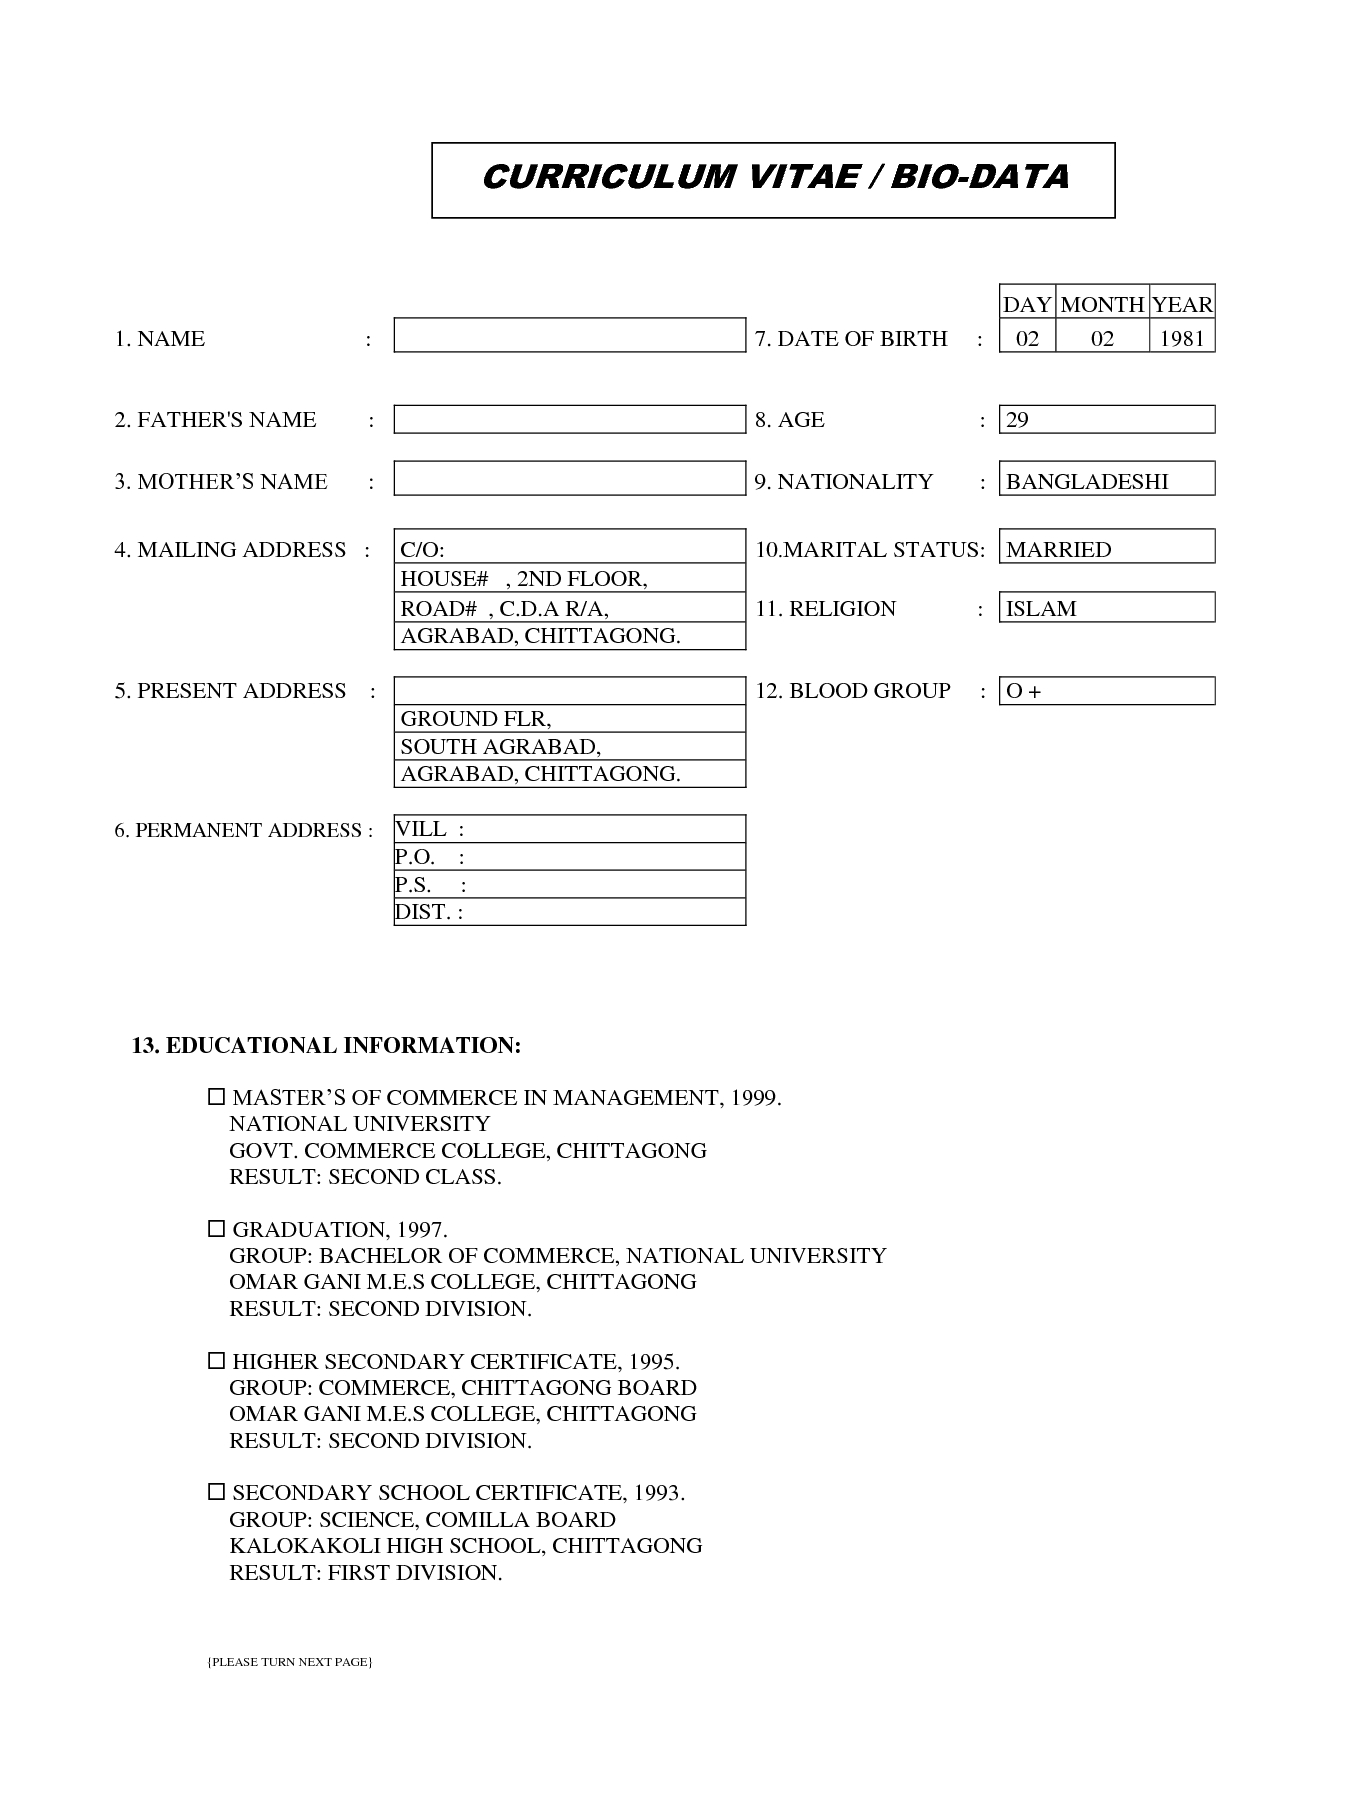 Work Experience Cv Template Year 10 Kjdsx1t2 Good Resume in dimensions 1350 X 1800